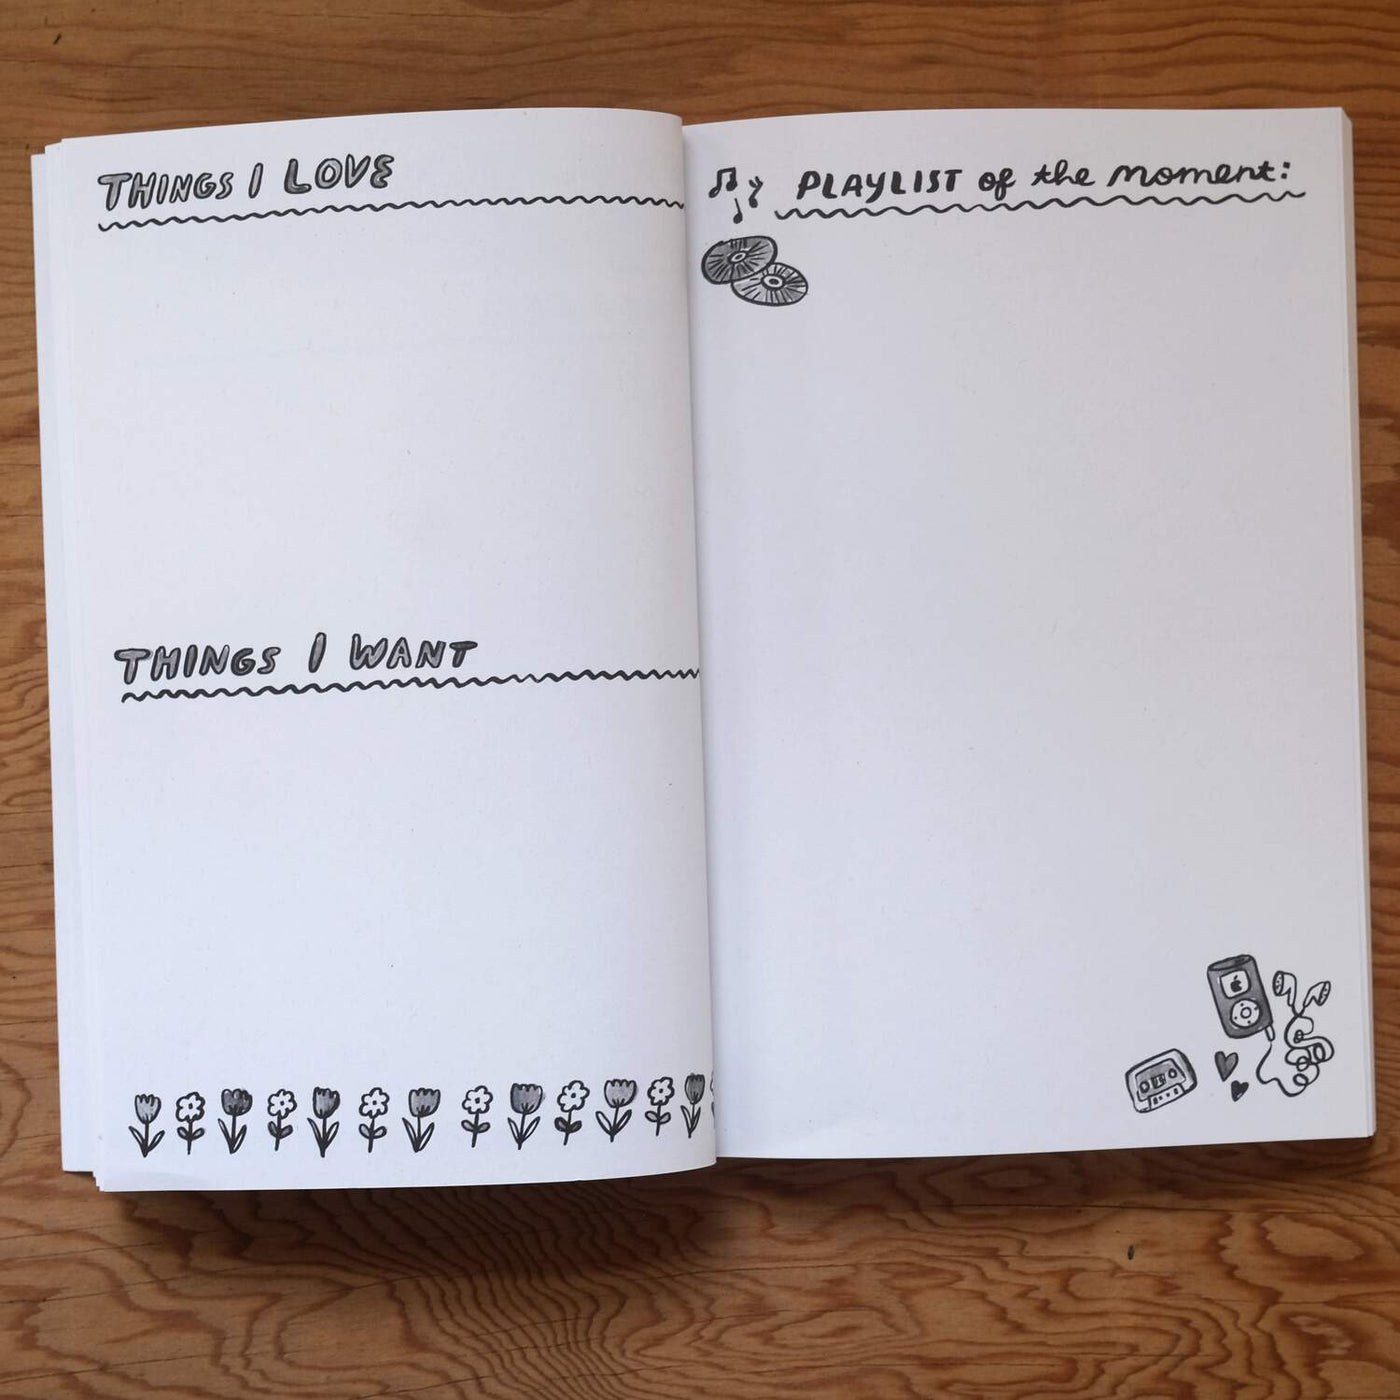 Phoebe’s Diary Notebook